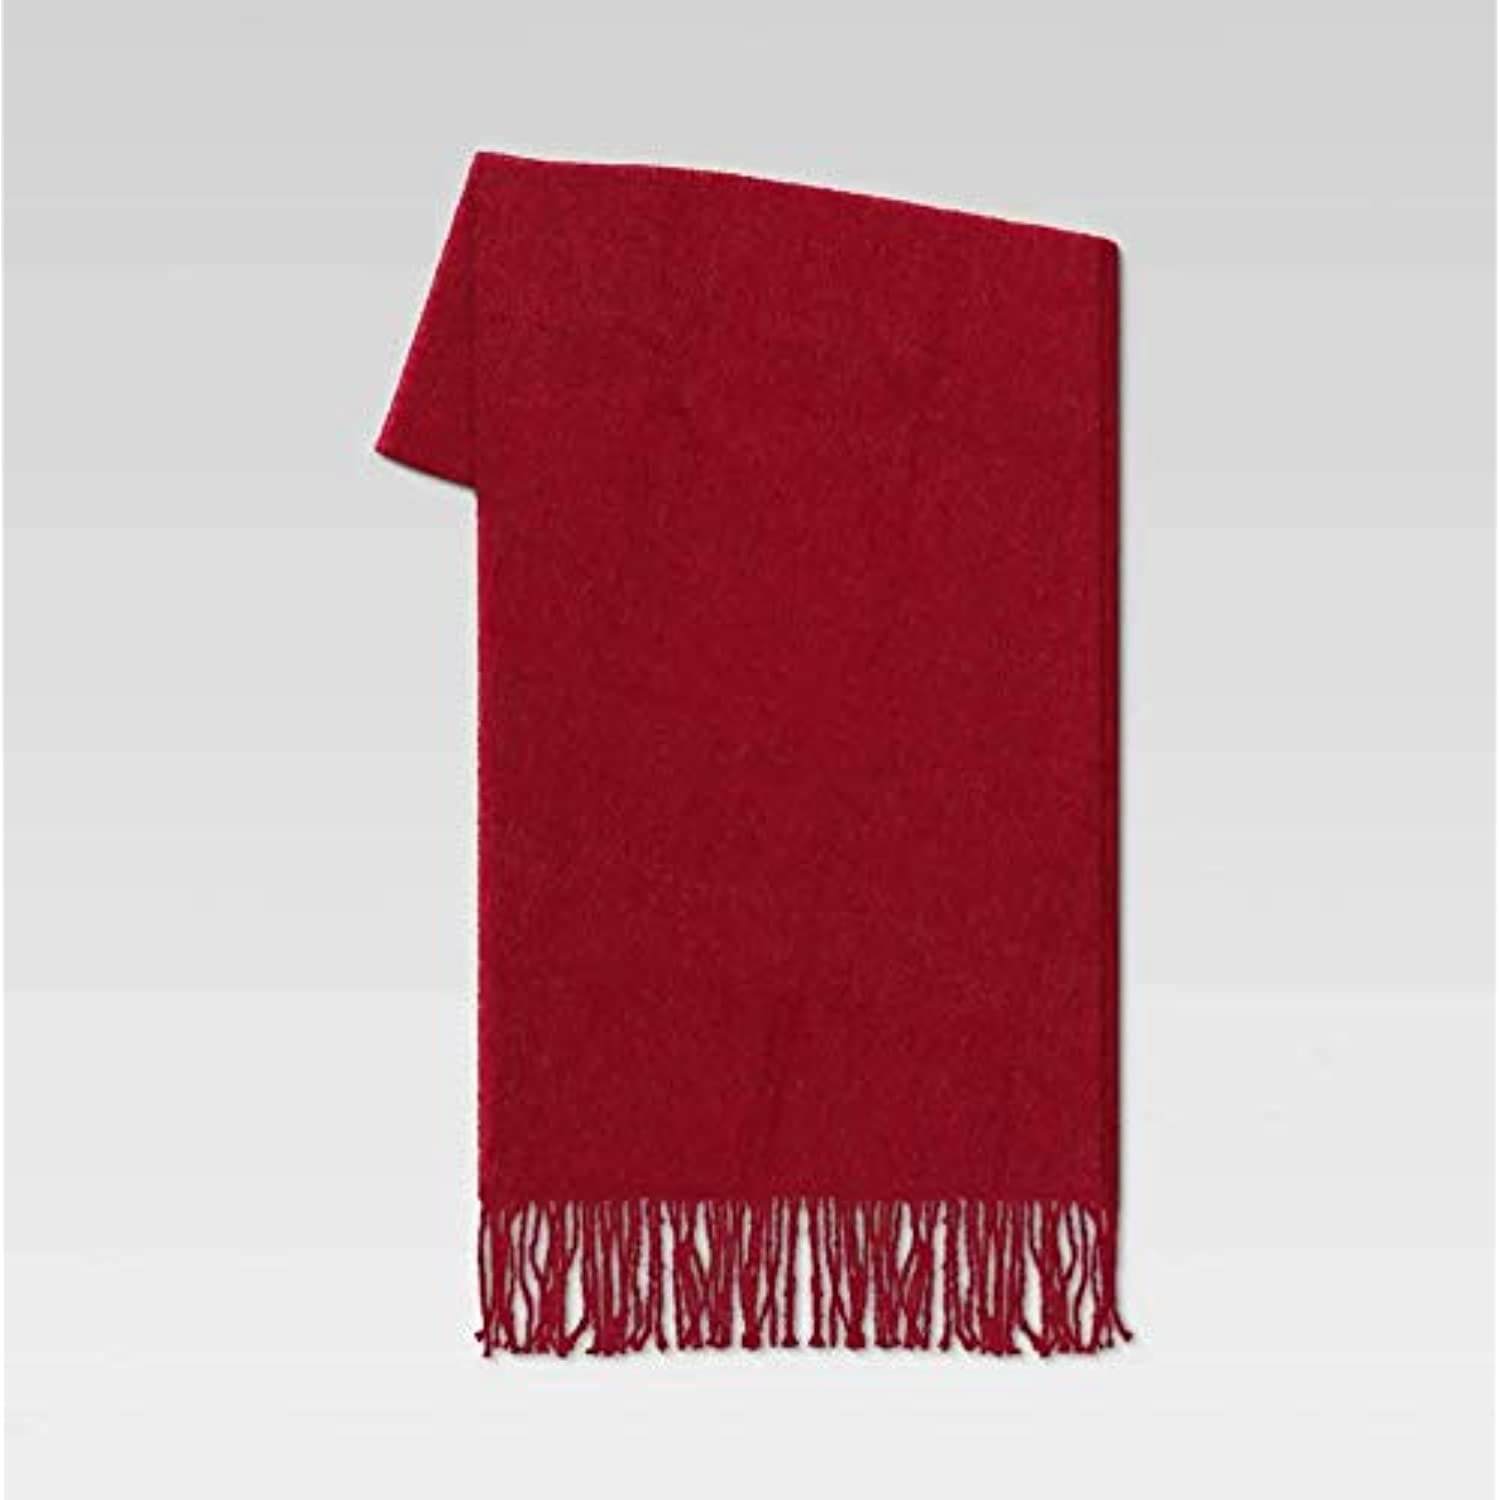 Quality and Design 50 x 60 in Chenille Throw Blanket Red Threshold 